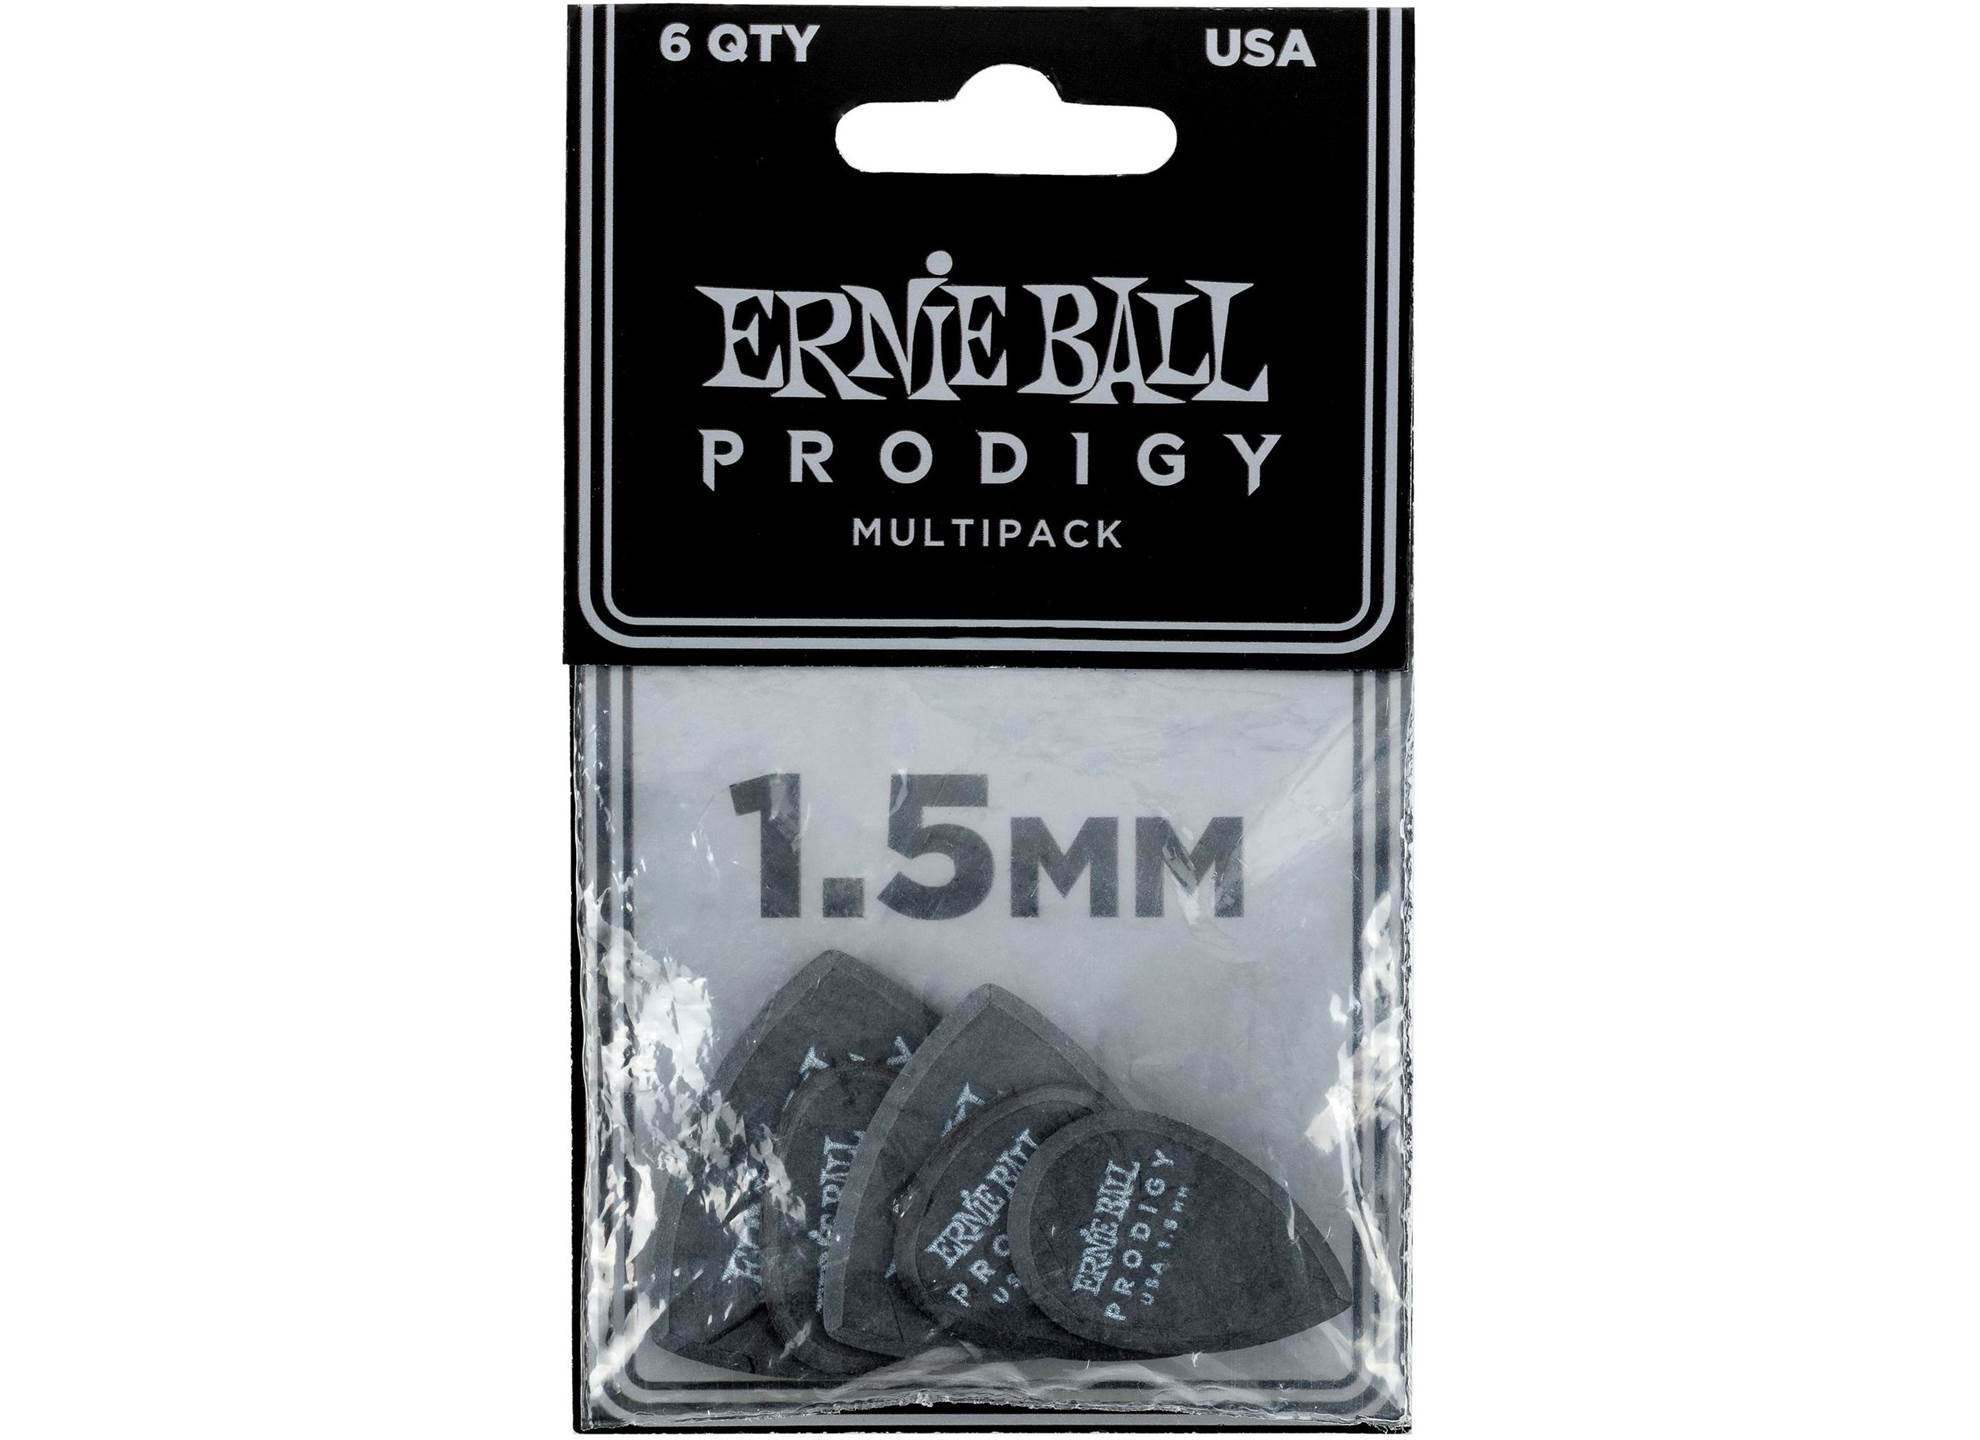 EB-9342 Prodigy 1,5mm Multi Pack (6-Pack)